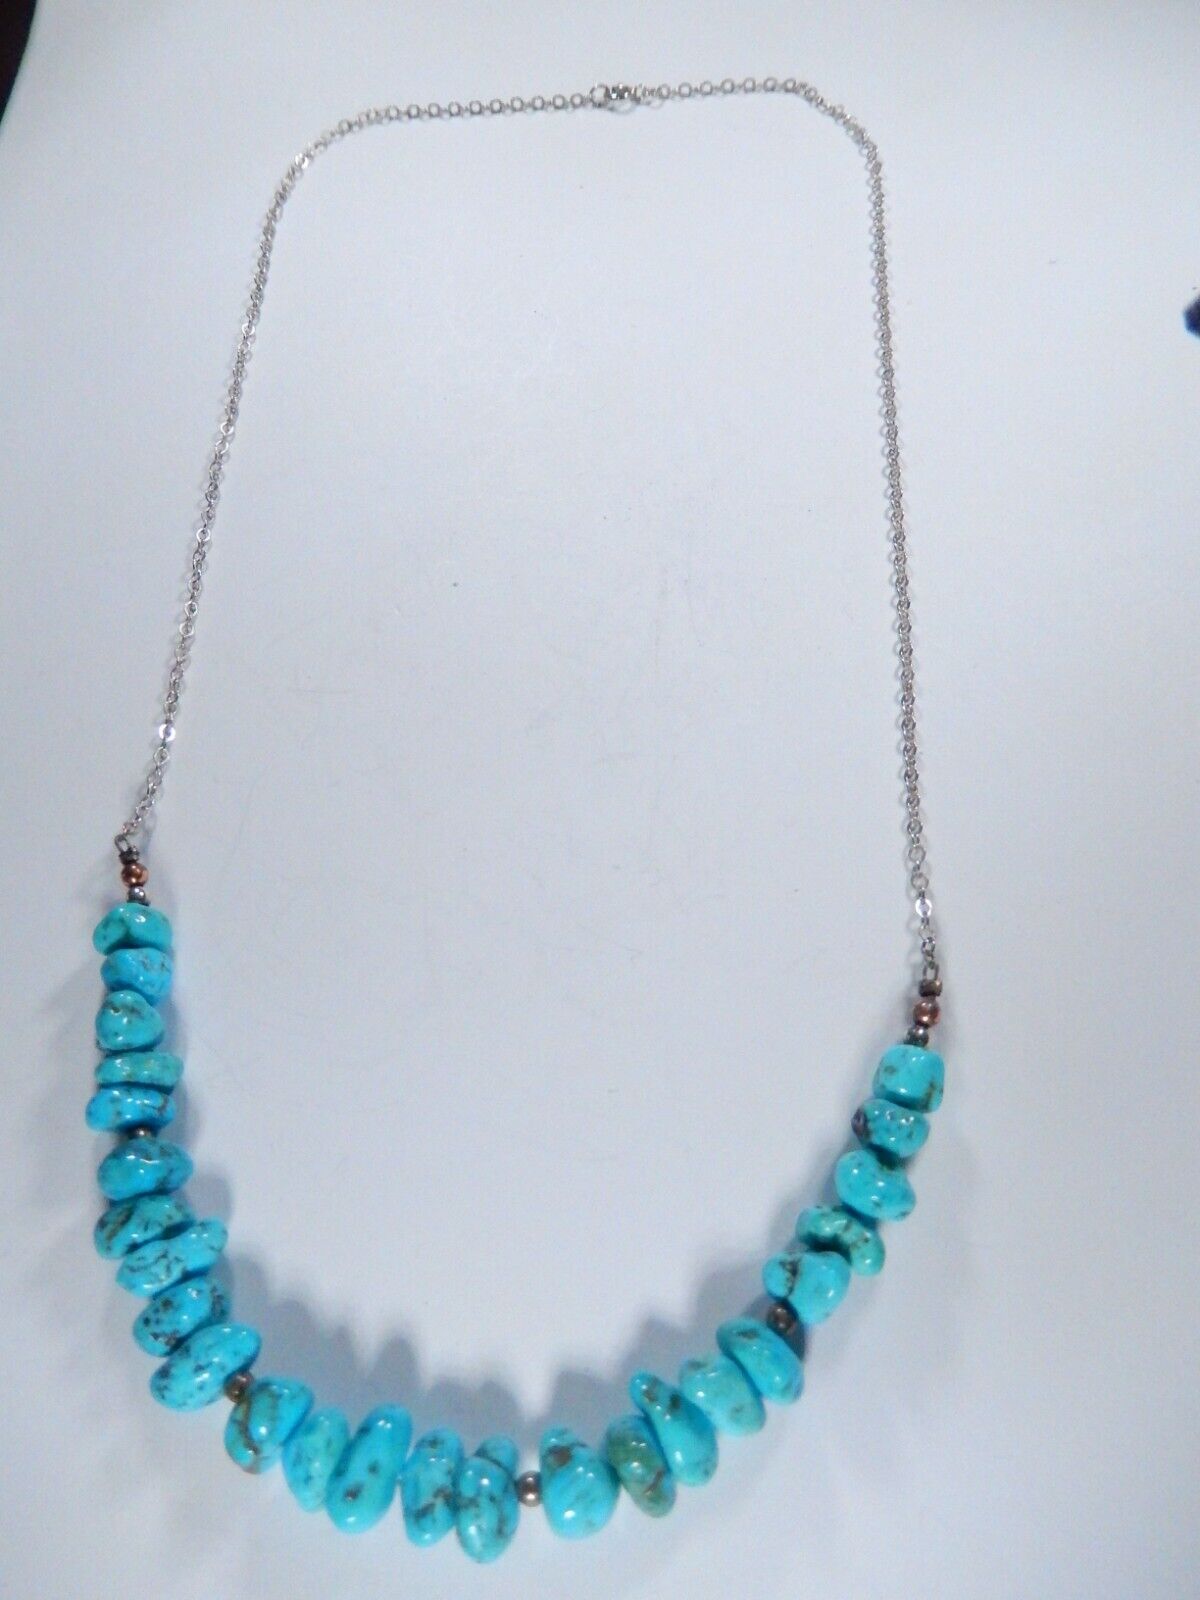 TURQUOISE & Sterling Beads NECKLACE Sterling Silver 925 Chain 20" Length